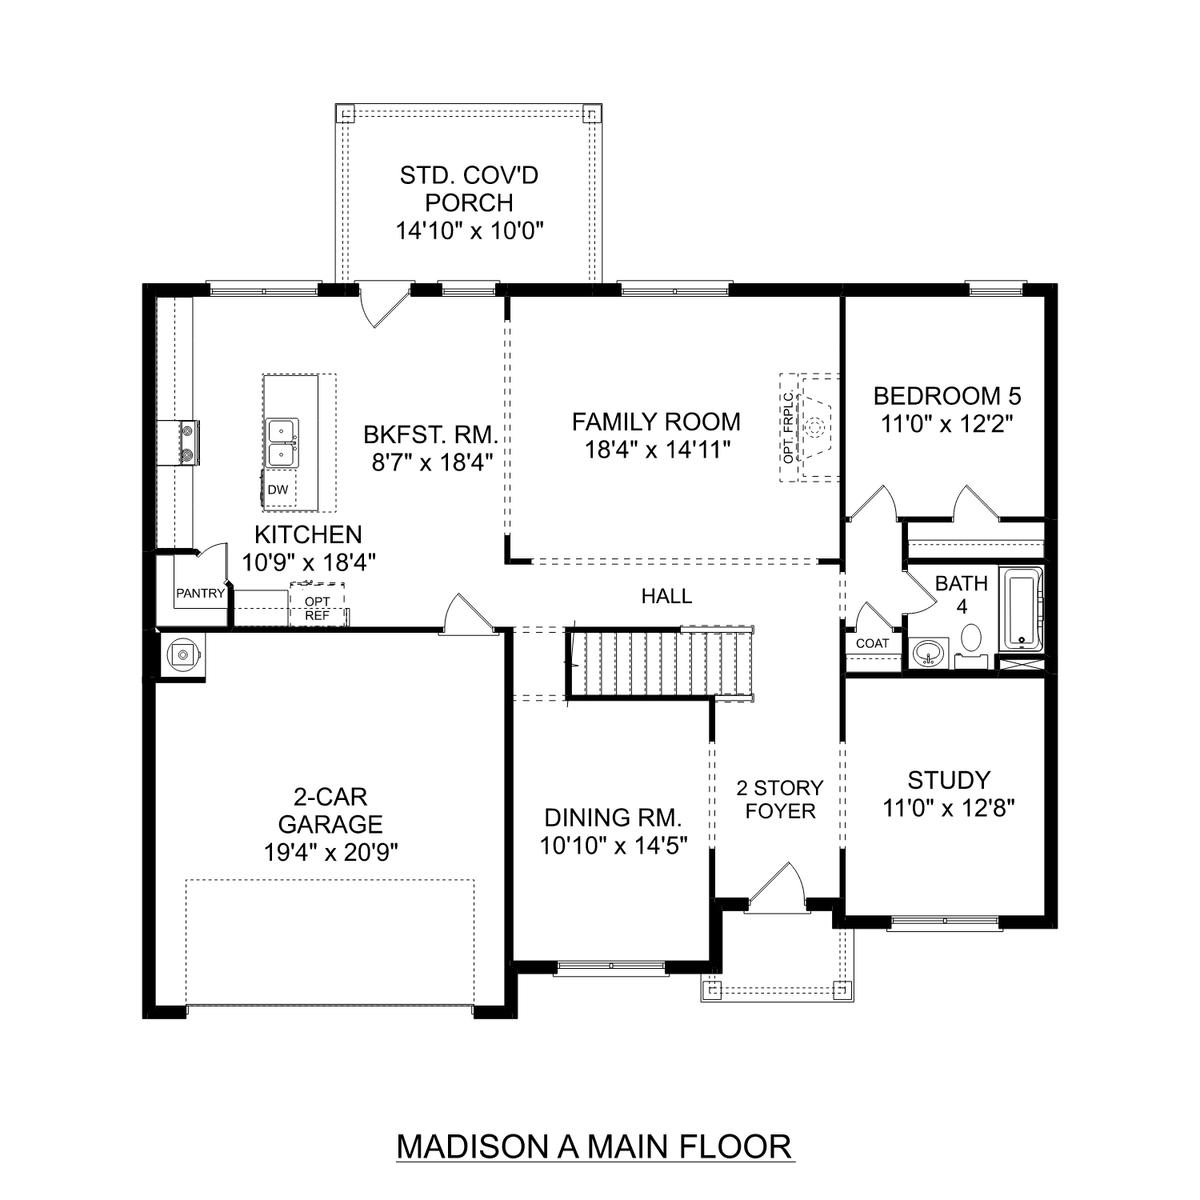 1 - The Madison A buildable floor plan layout in Davidson Homes' Kendall Downs community.